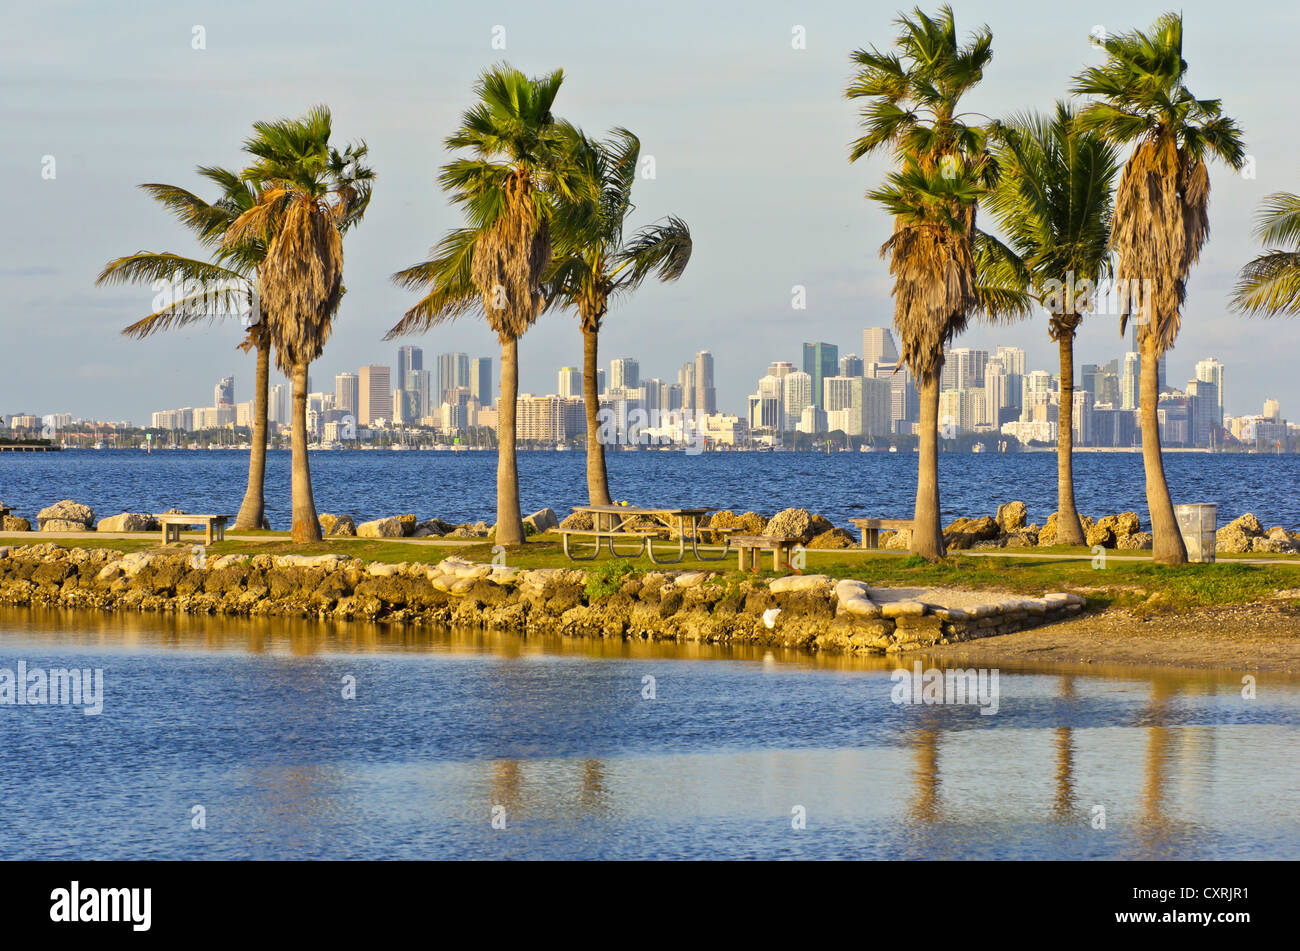 Skyline of downtown Miami with palm trees at front, from Matheson Hammock Park, Florida, USA Stock Photo